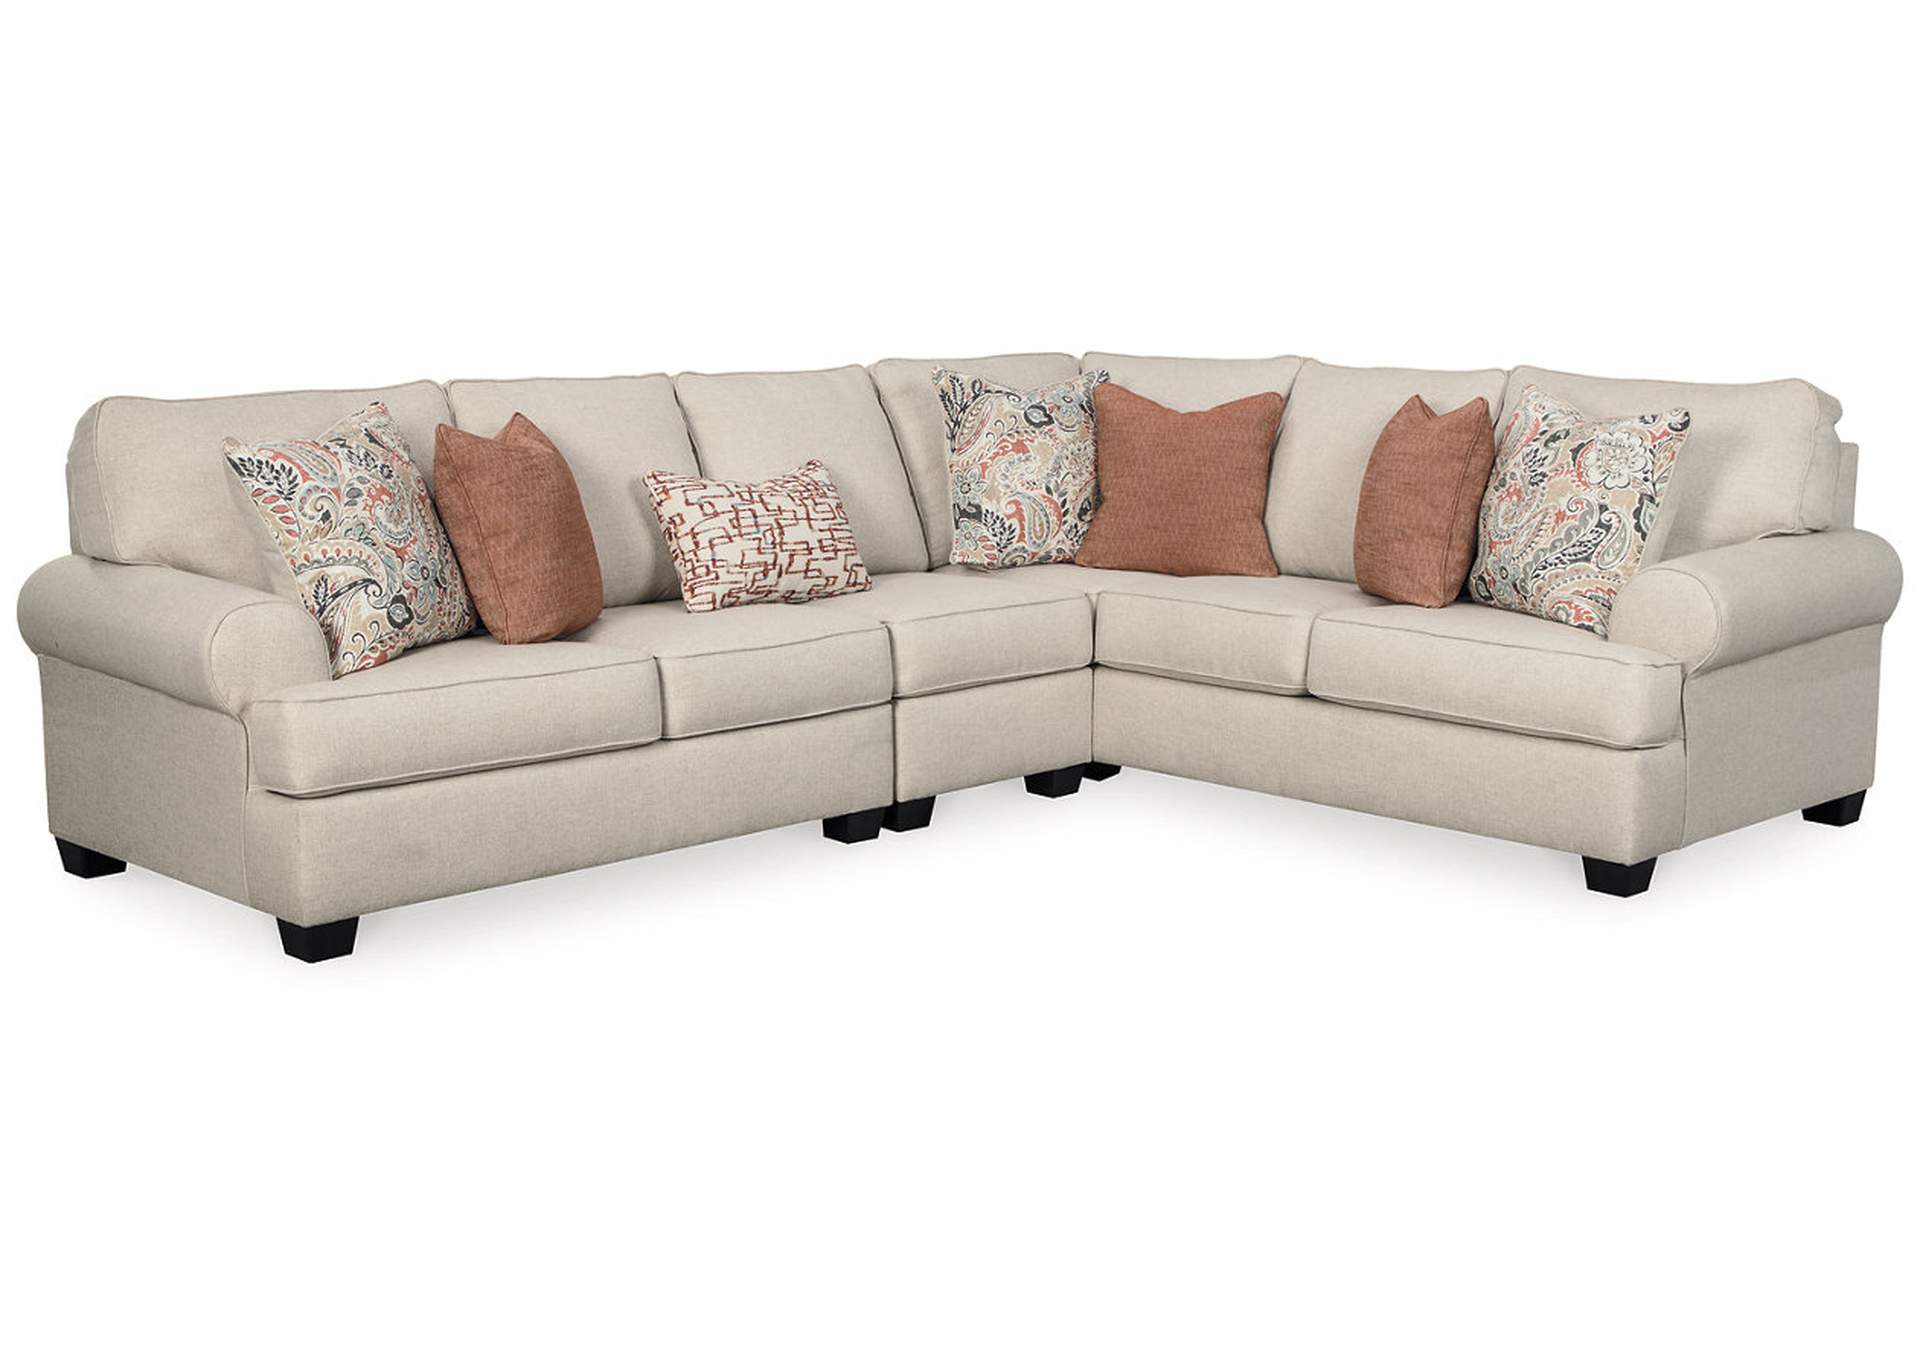 Amici 3-Piece Sectional,Signature Design By Ashley